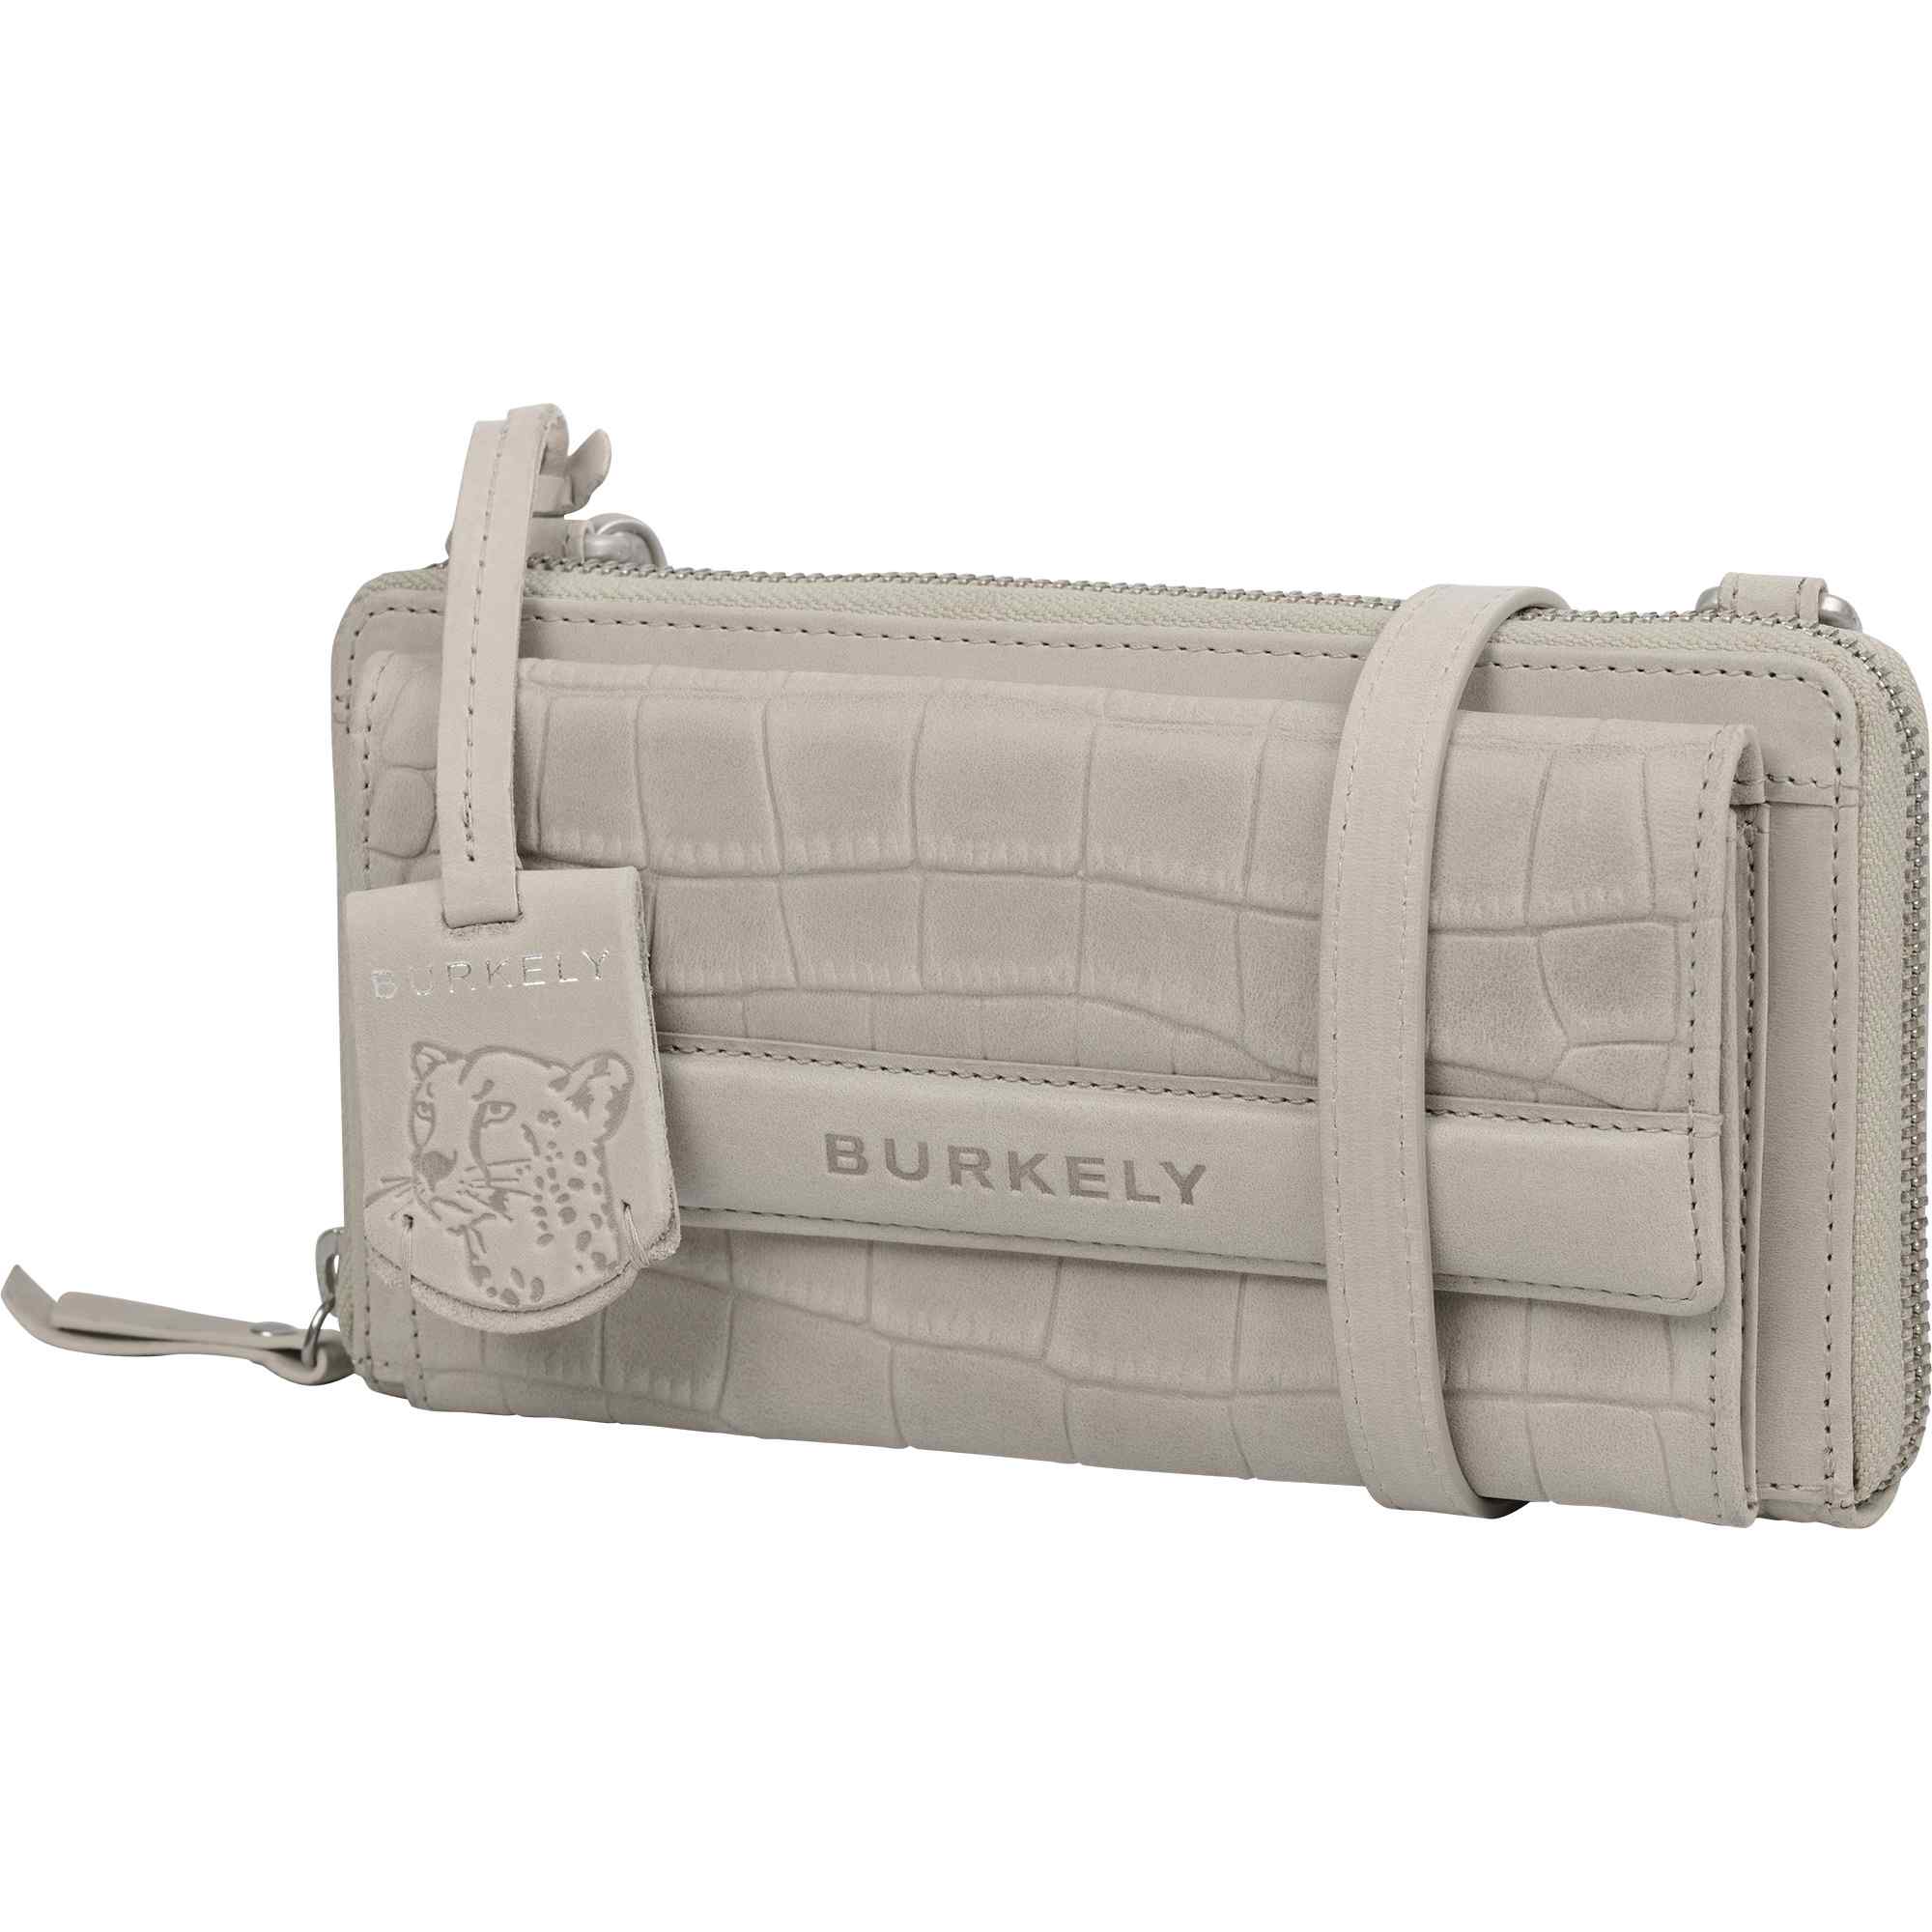 BURKELY CASUAL CAYLA PHONE WALLET